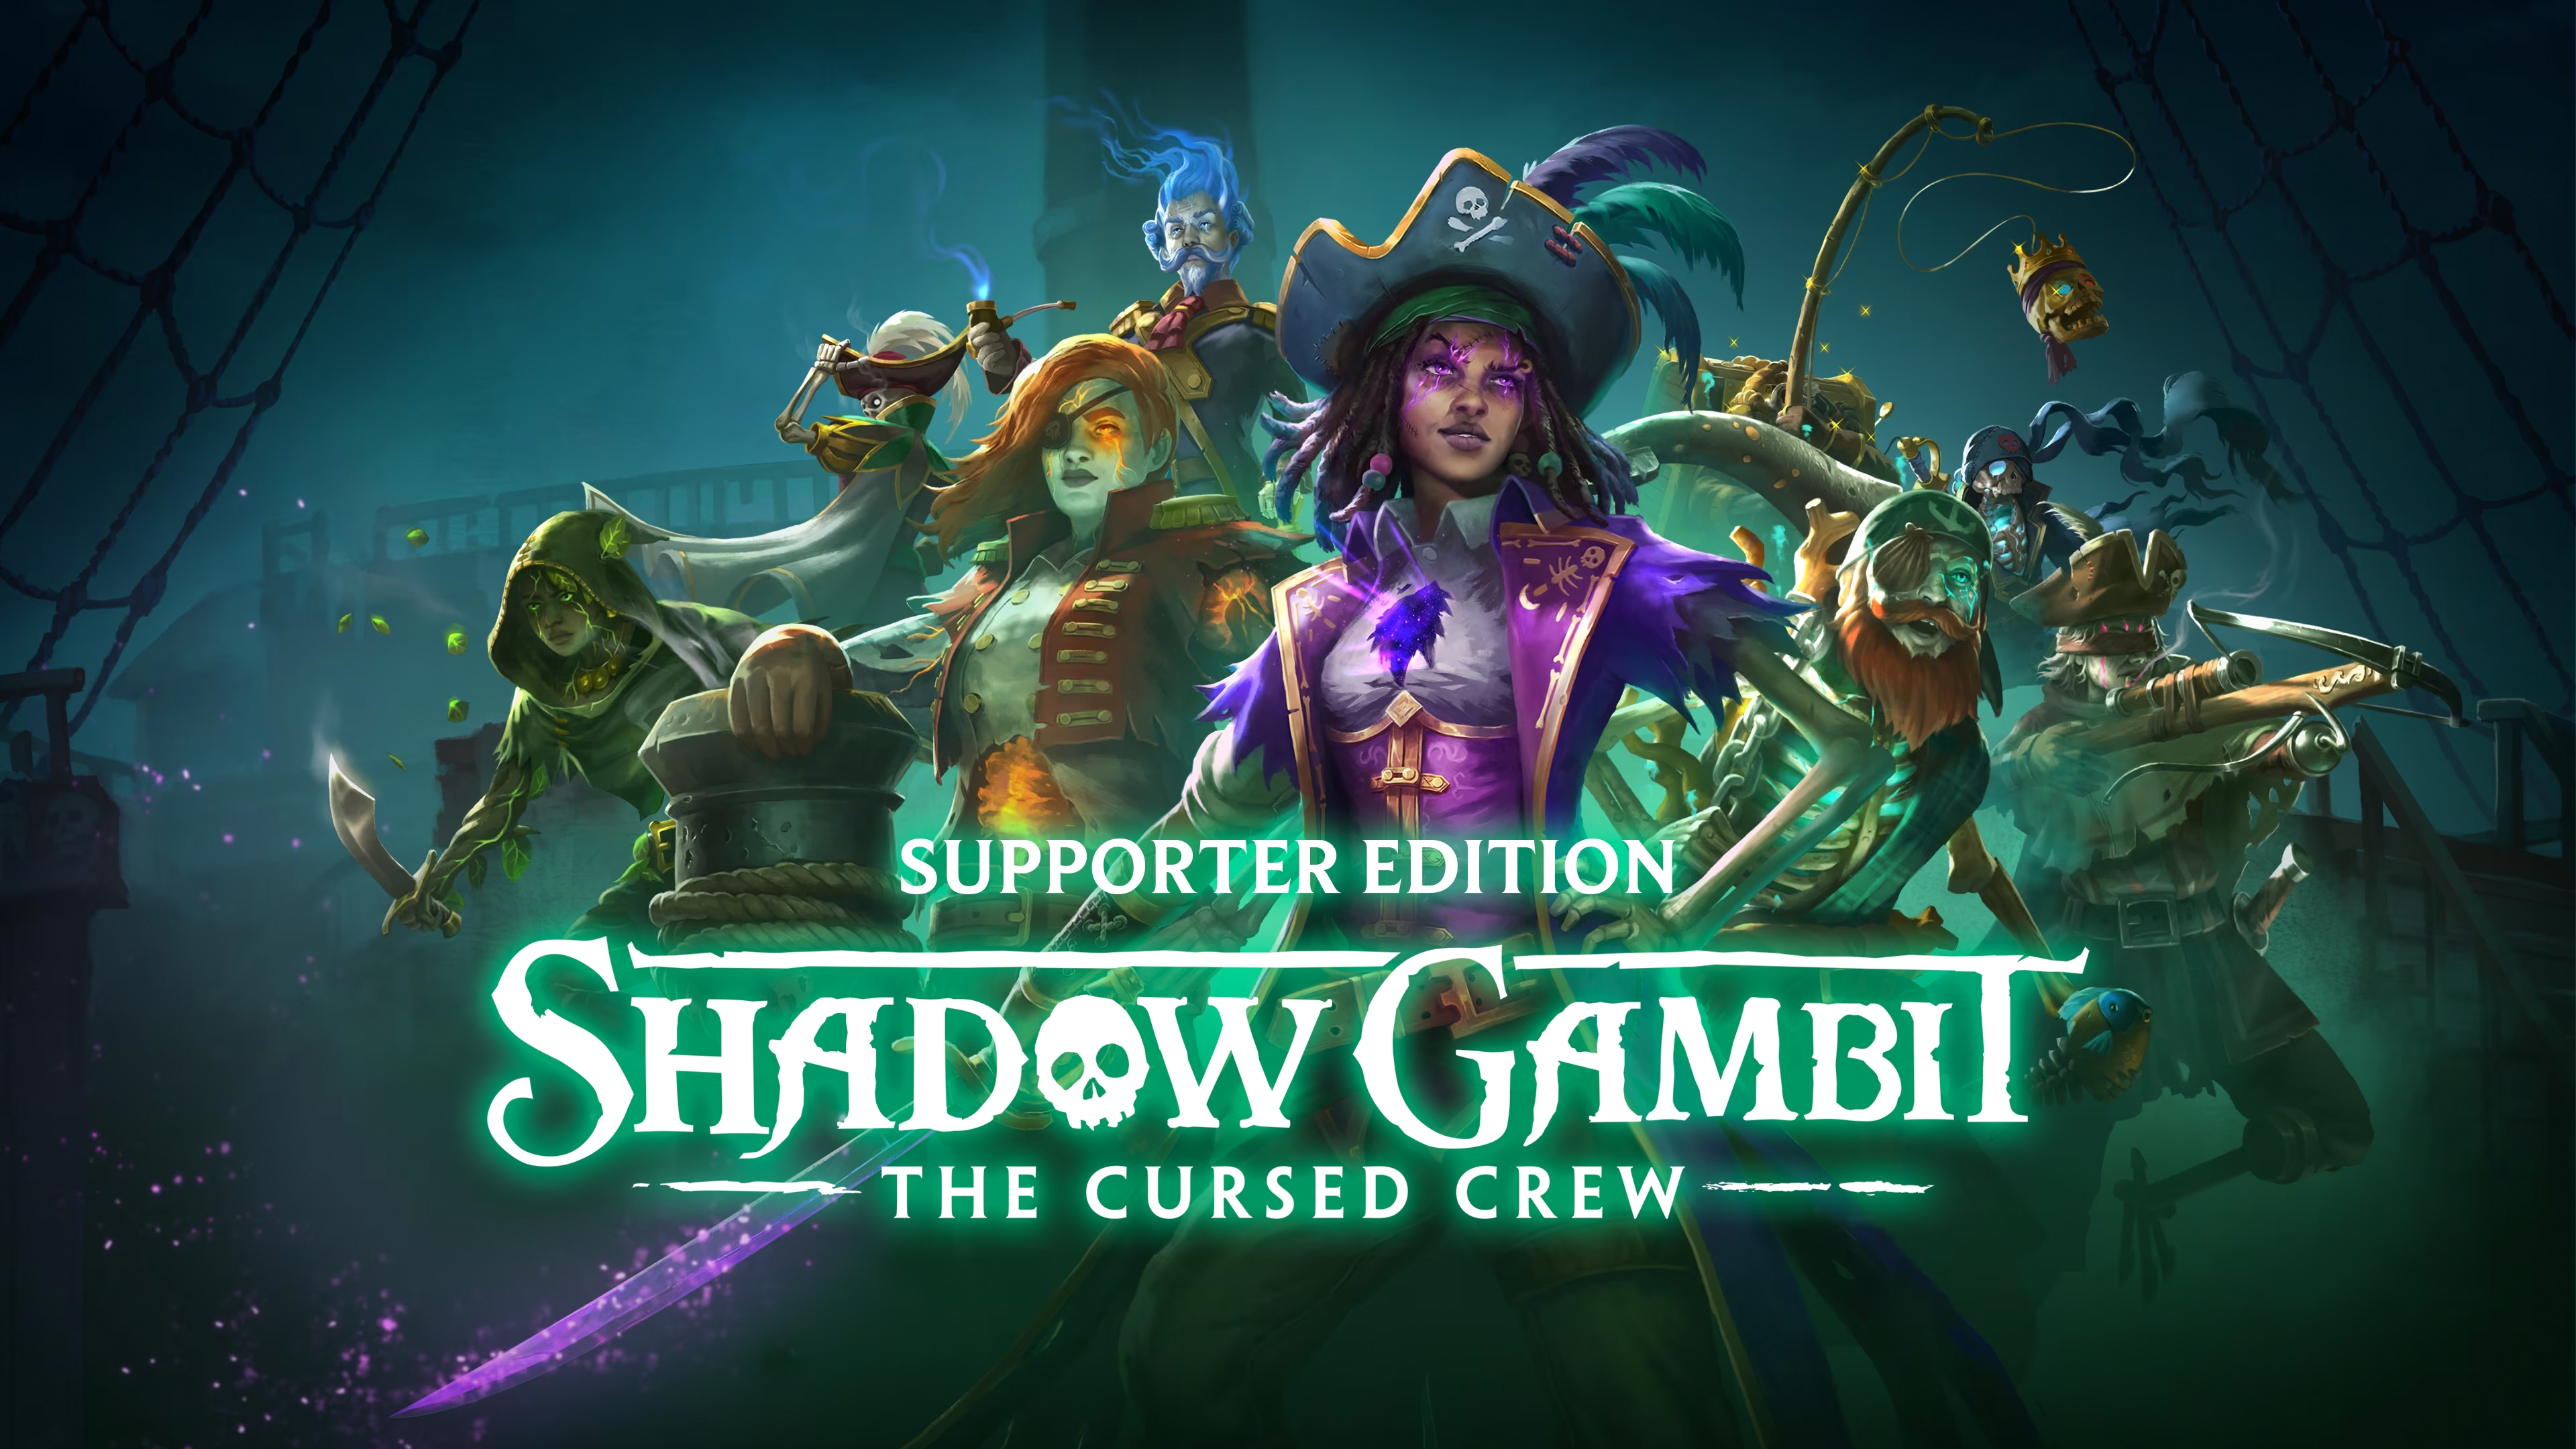 Shadow Gambit: The Cursed Crew  Download and Buy Today - Epic Games Store